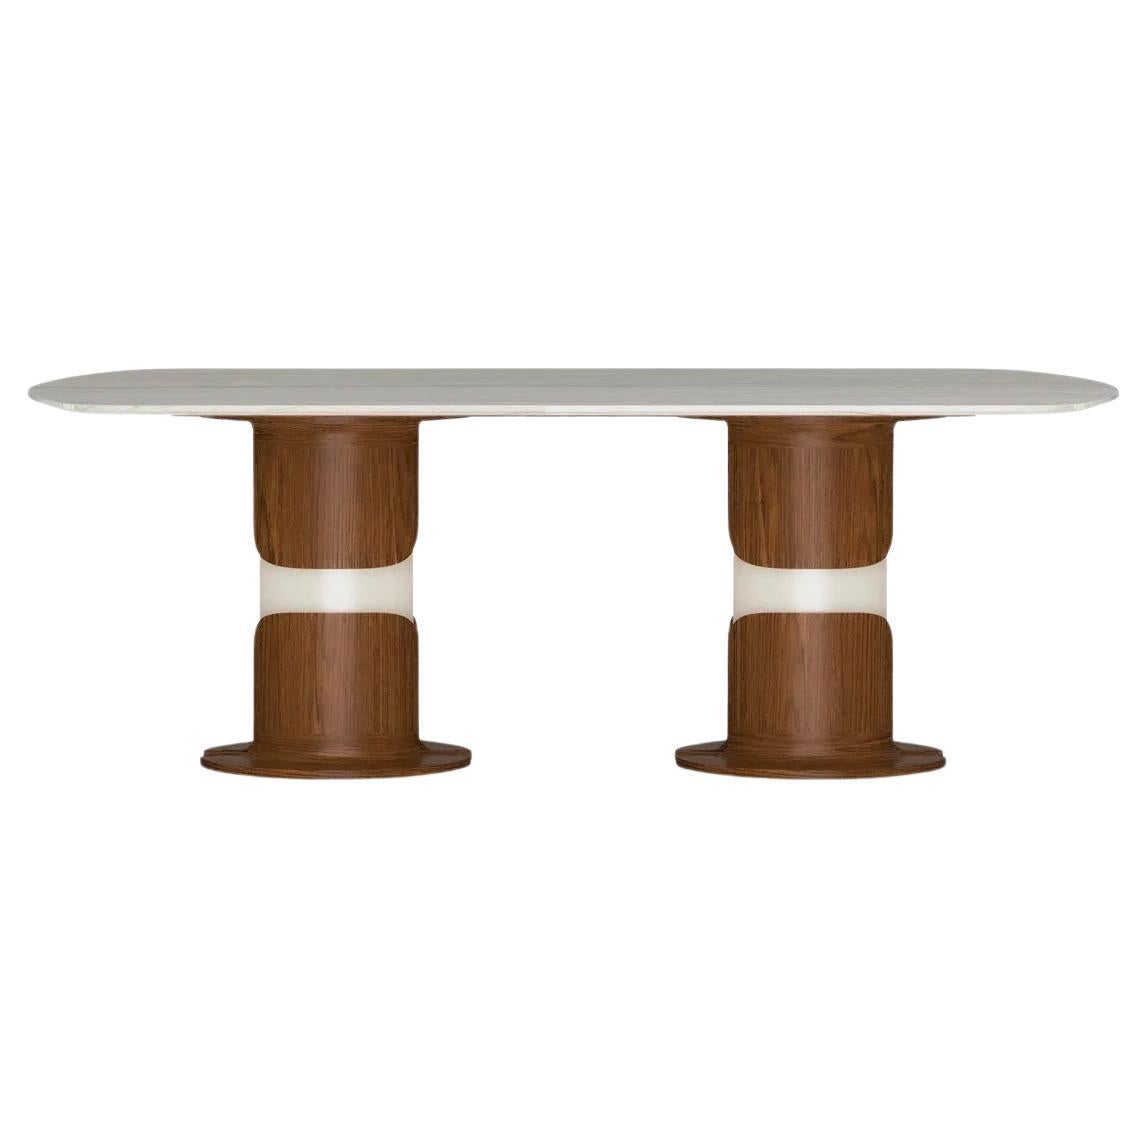 Dogum dining table displays a sculptural and powerful stance. The flower-like form of the legs symbolizes birth. The form of the lower part of the dining table consists of solid walnut, walnut veneer and glossy lacquer on wood. The dining table’s